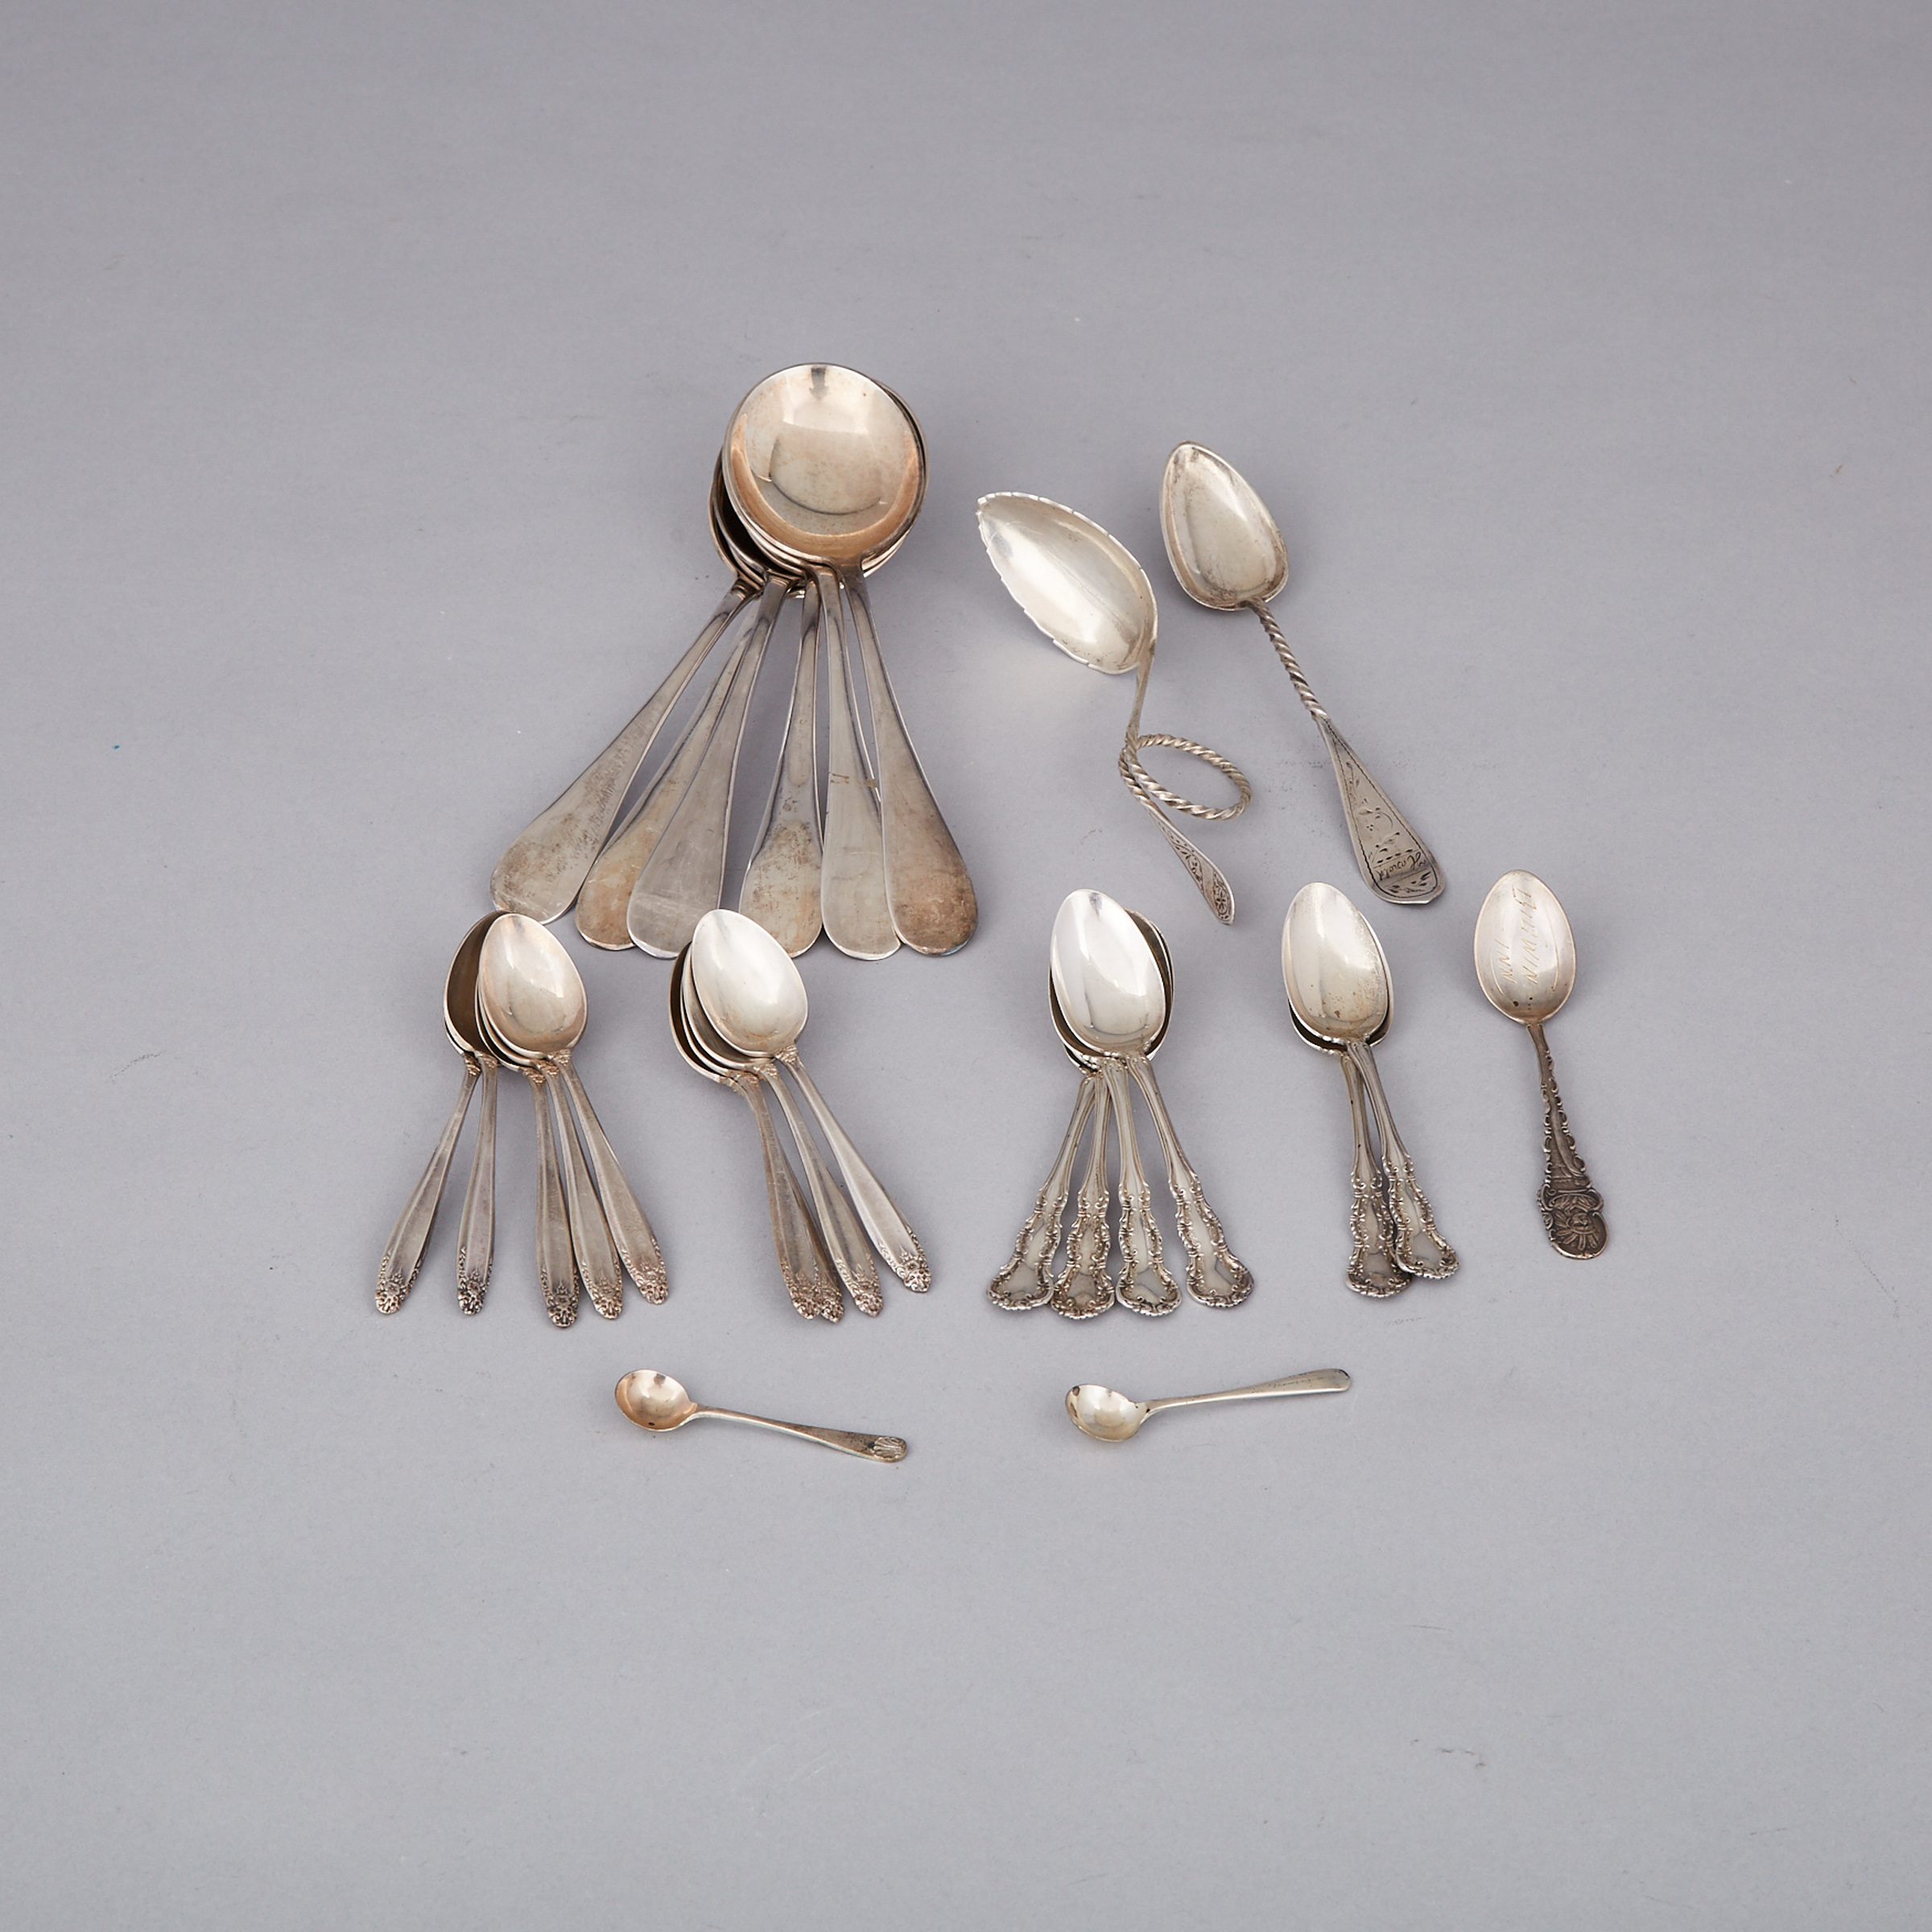 Group of Twenty-Six Mainly North American Silver Spoons, 20th century